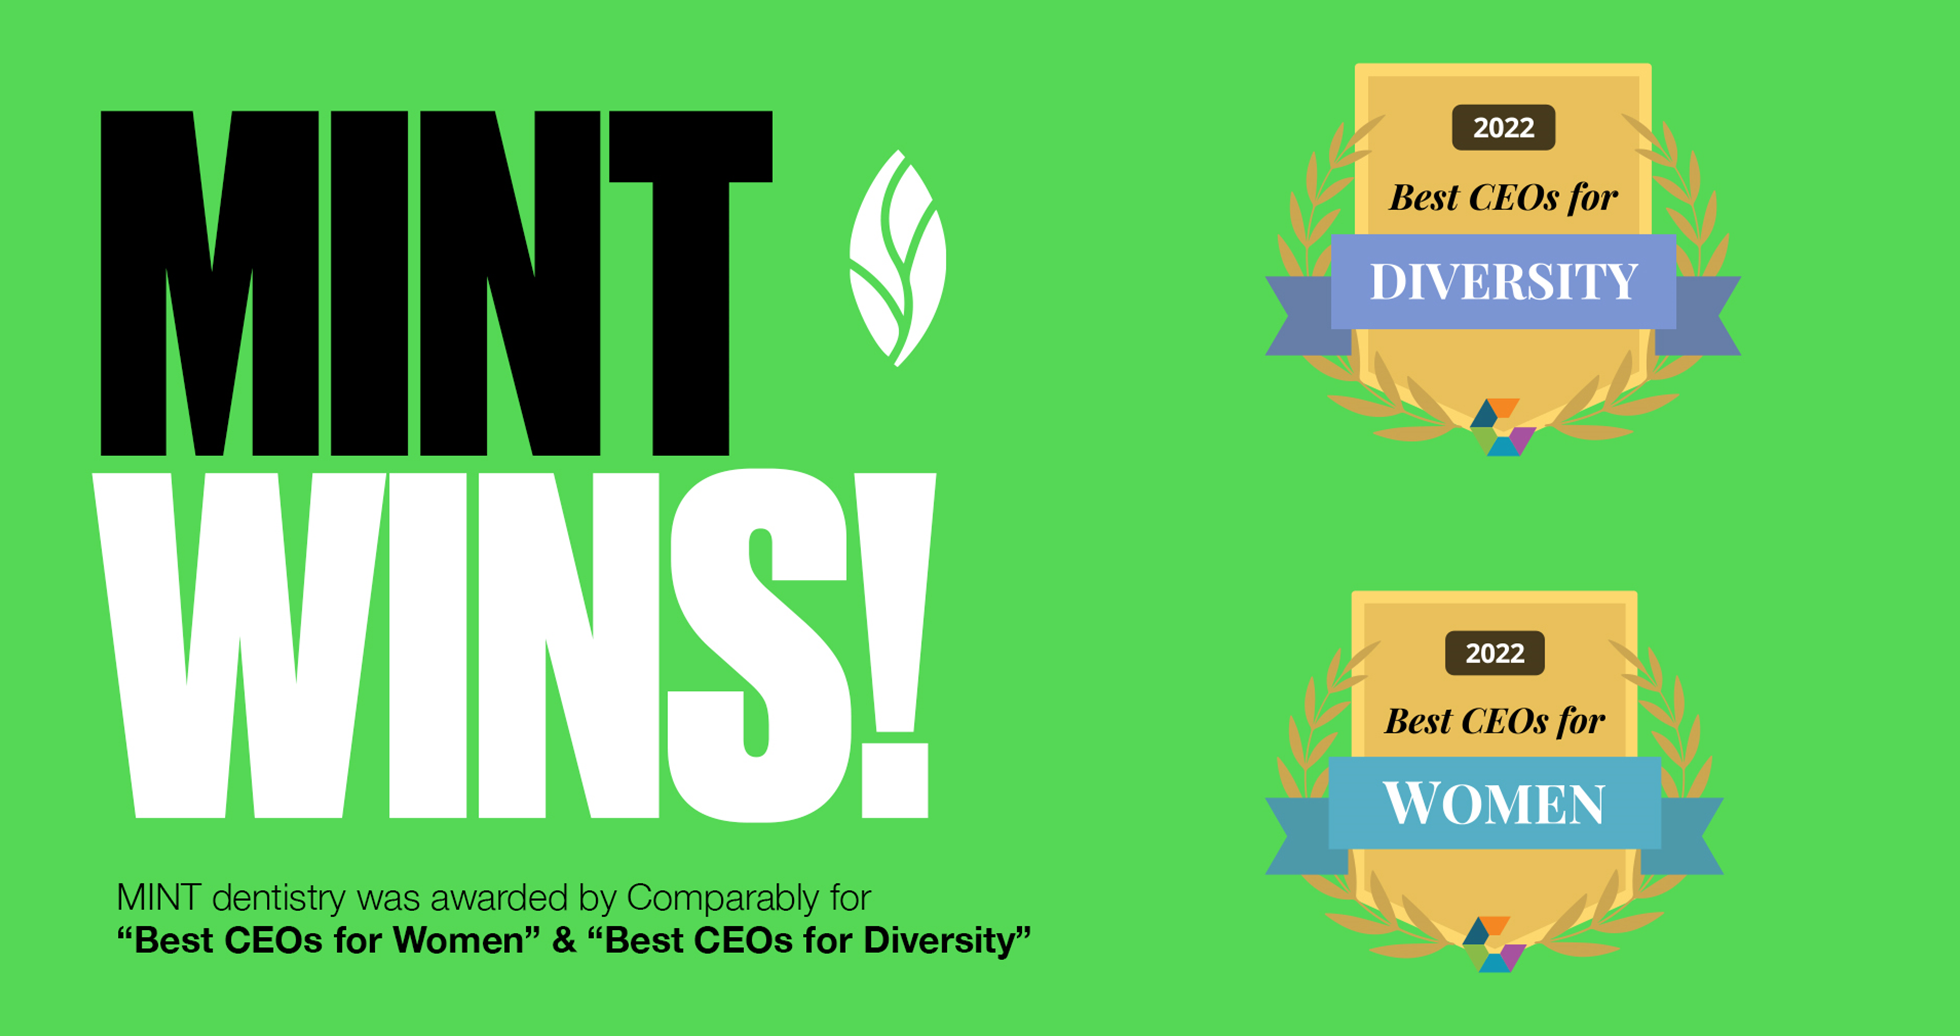 Best CEO for Women and Best CEO for Diversity